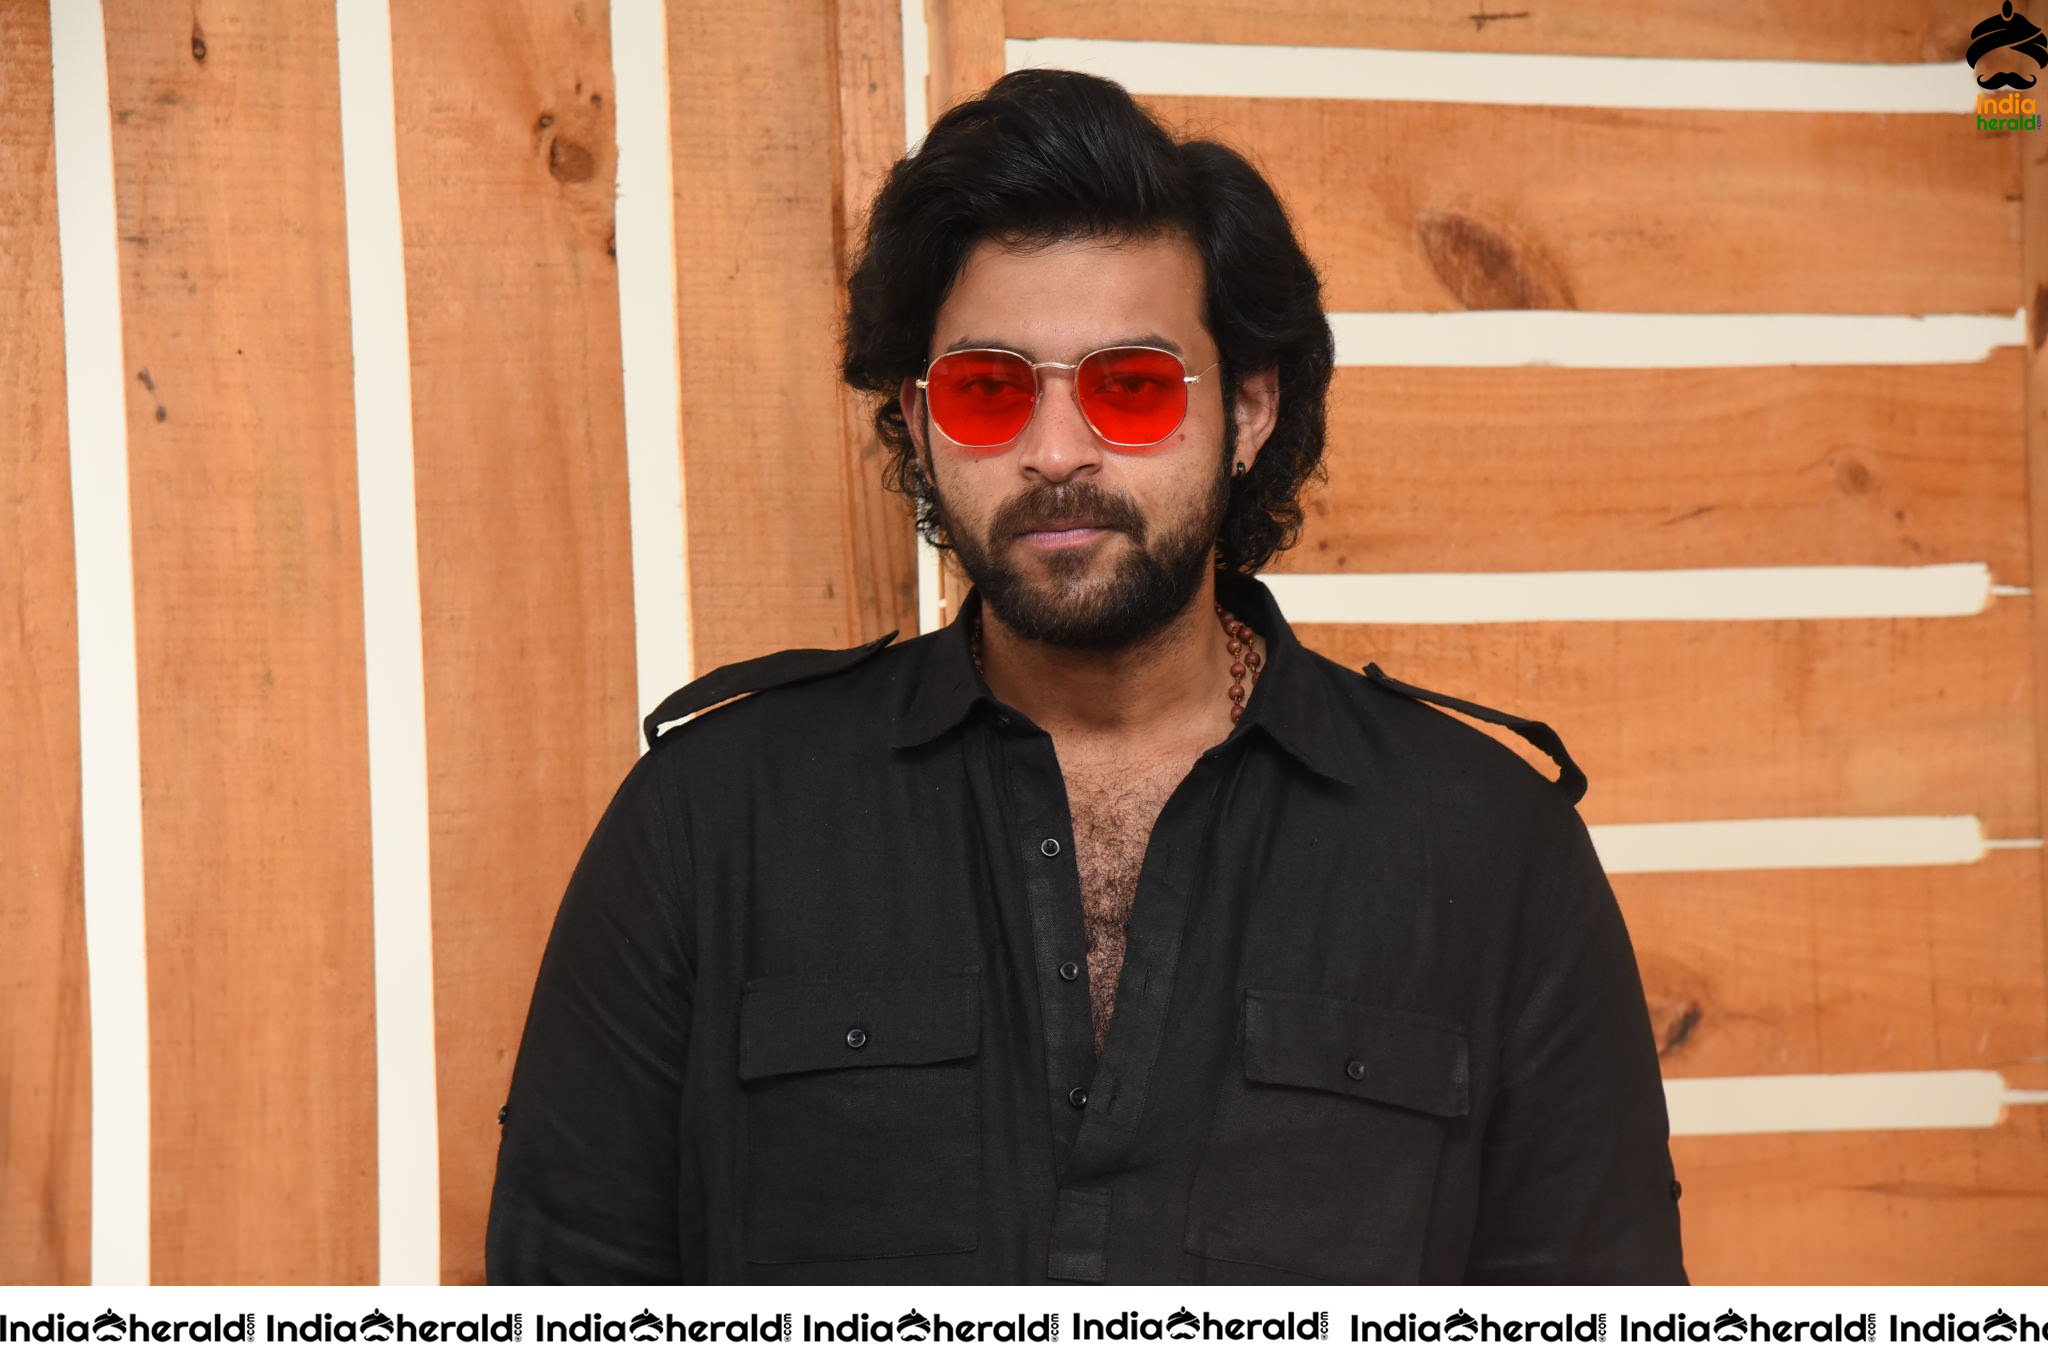 Actor Varun Tej Looking Dashing in Black and Red Coolers Set 2